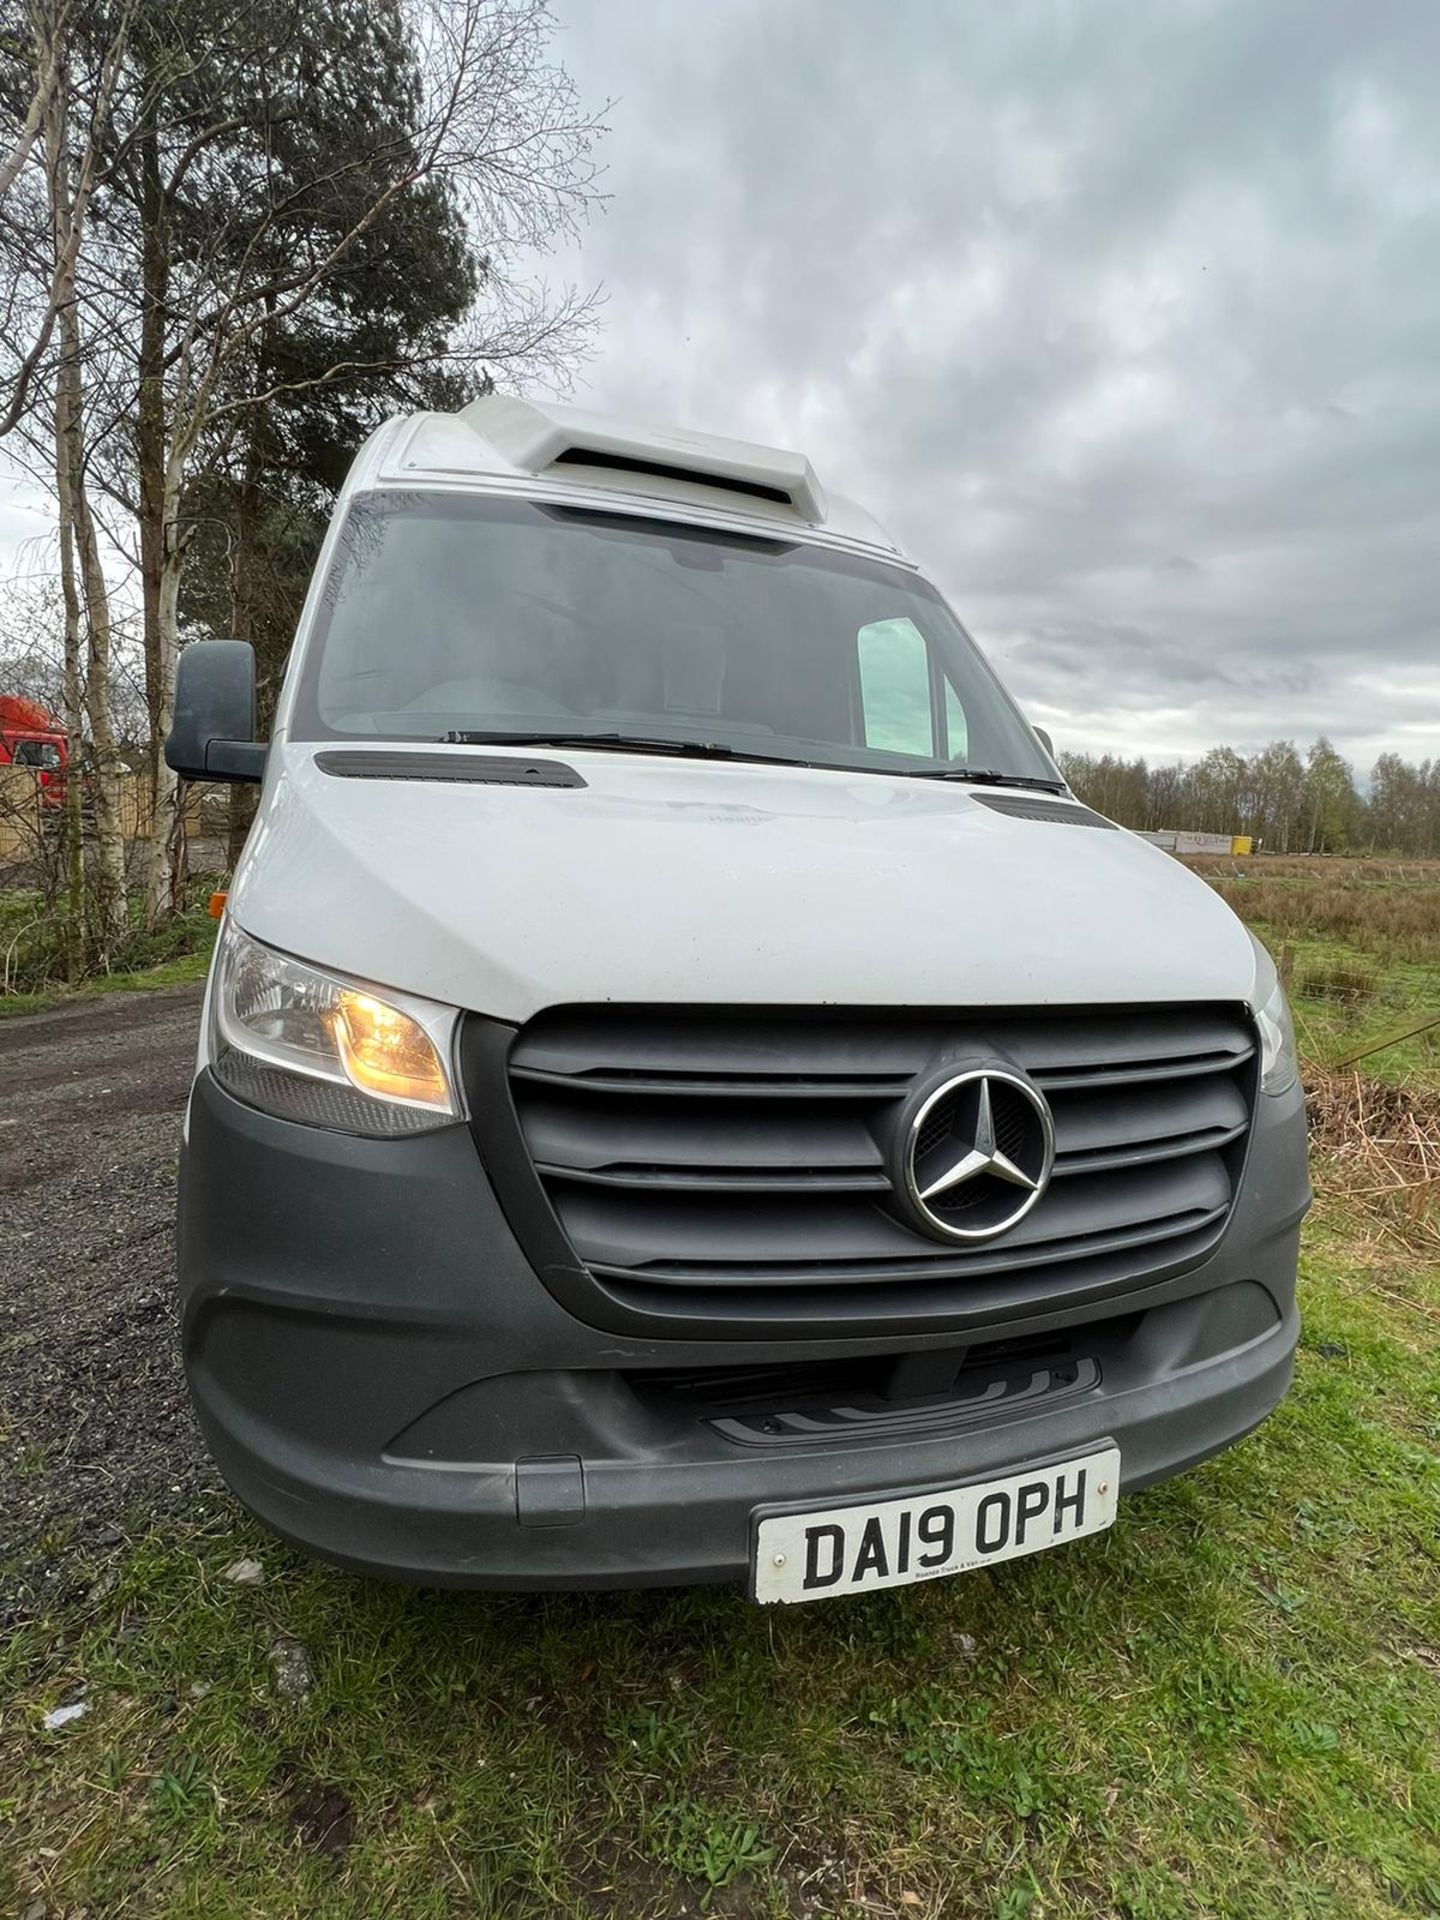 MERCEDES SPRINTER 314CDI AIR CONDITIONING - Image 13 of 22